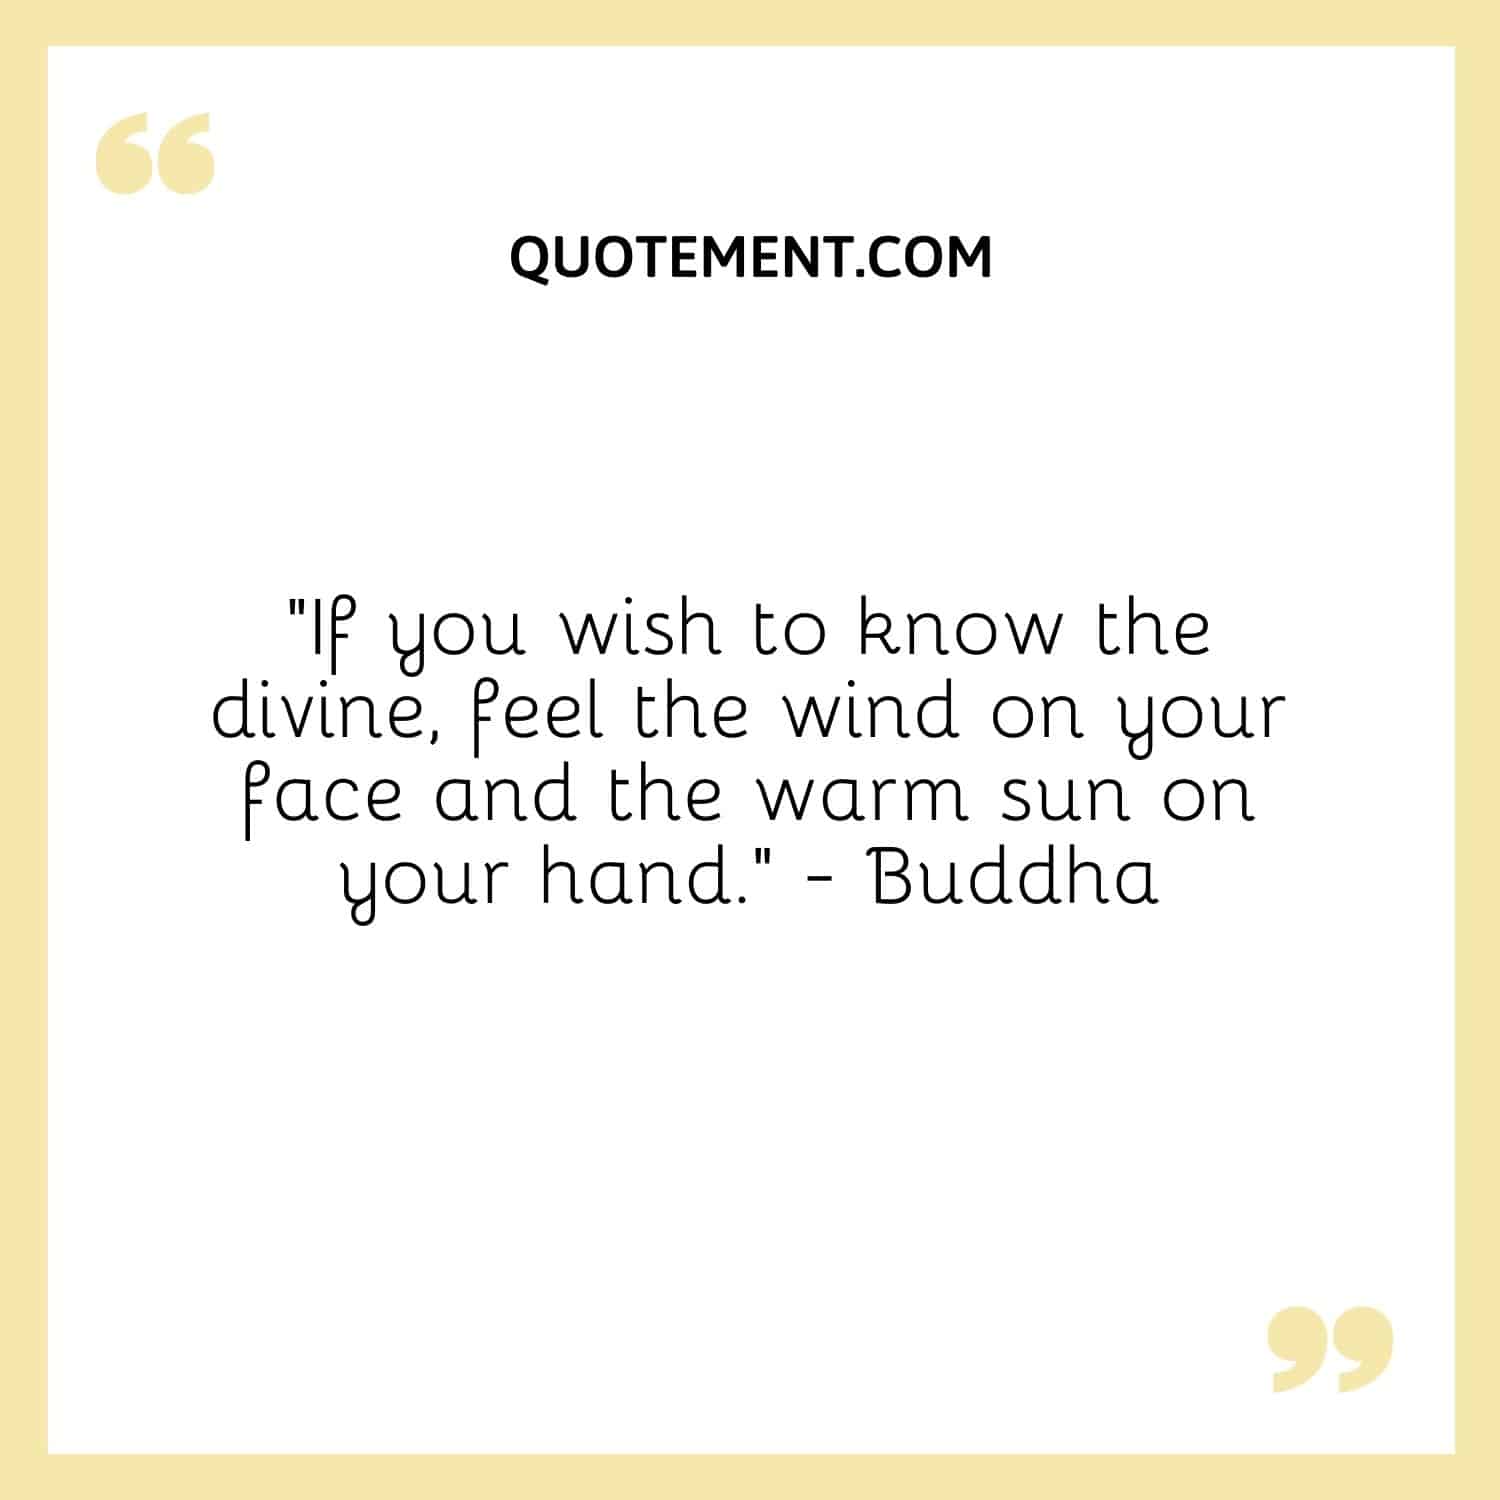 If you wish to know the divine, feel the wind on your face and the warm sun on your hand